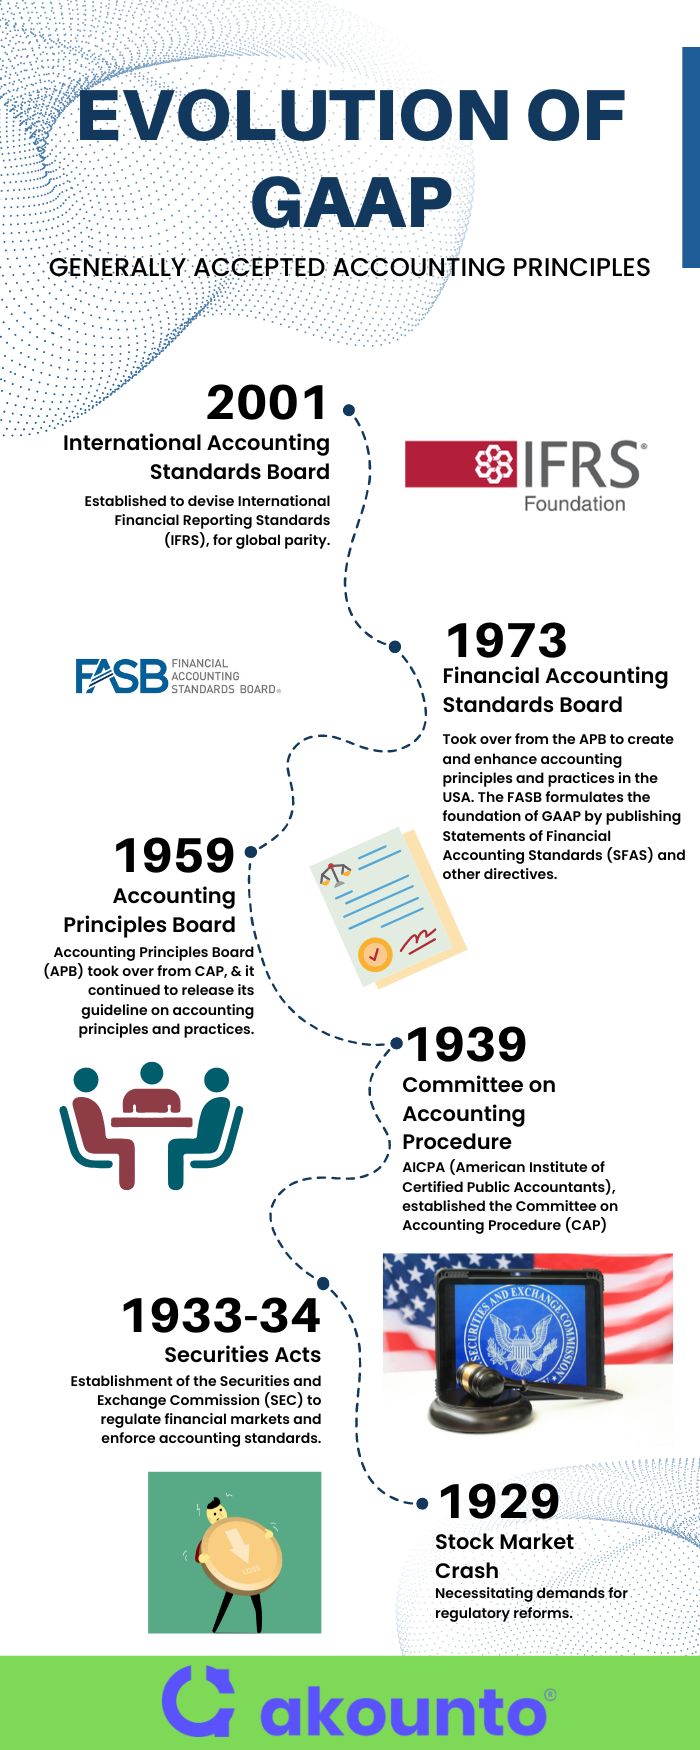 History and Evolution of GAAP